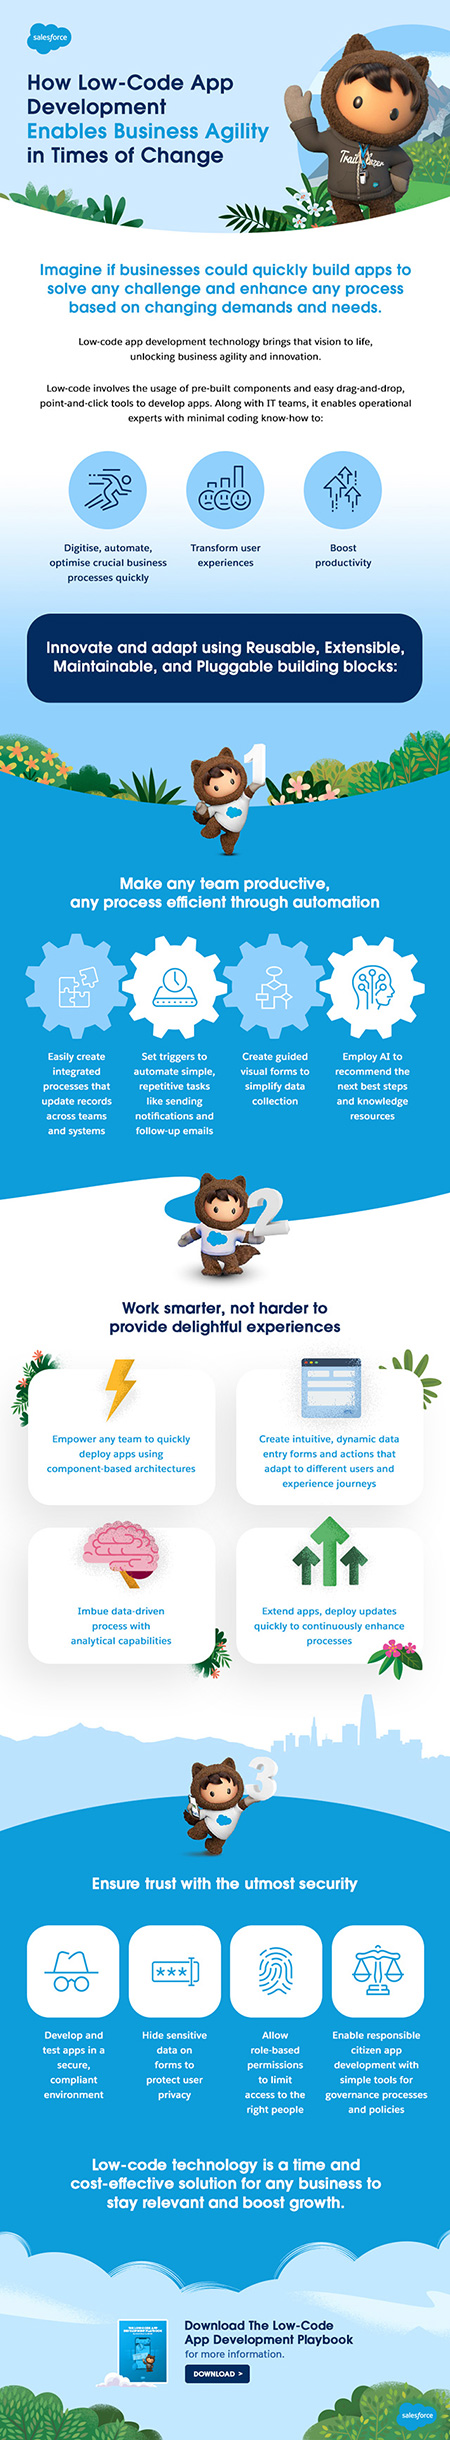 Infographic: How Low-Code App Development Enables Business Agility in Times of Change